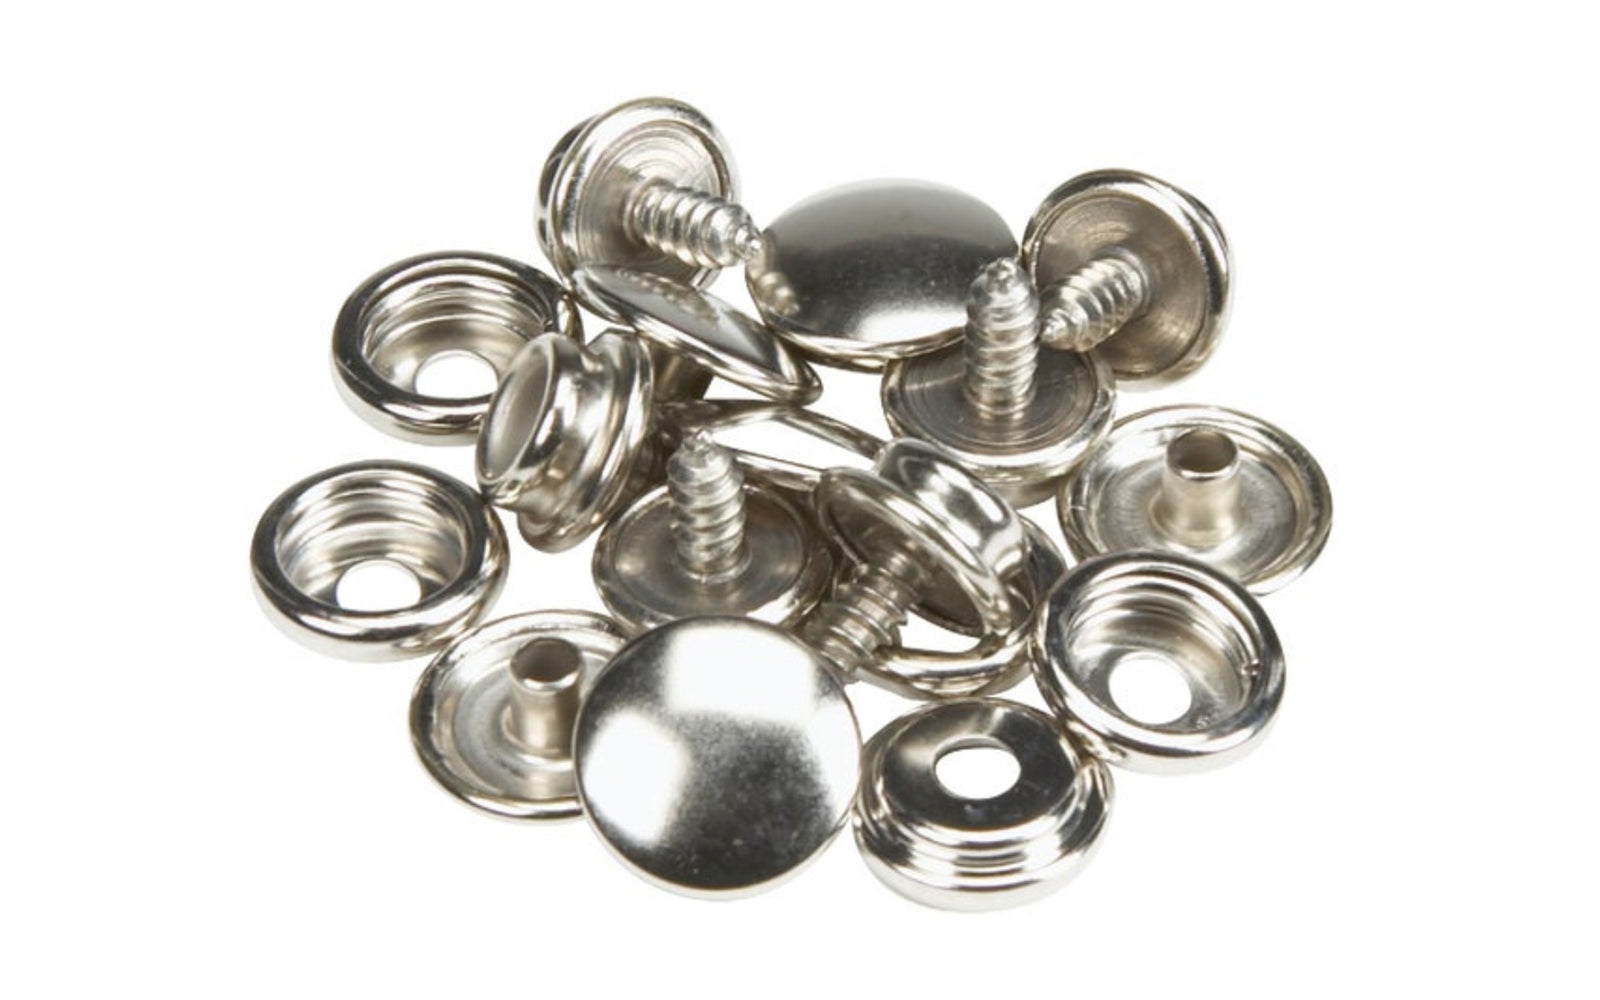 Brass Nickel Plated Canvas Snap Fastener Kit 6 Count